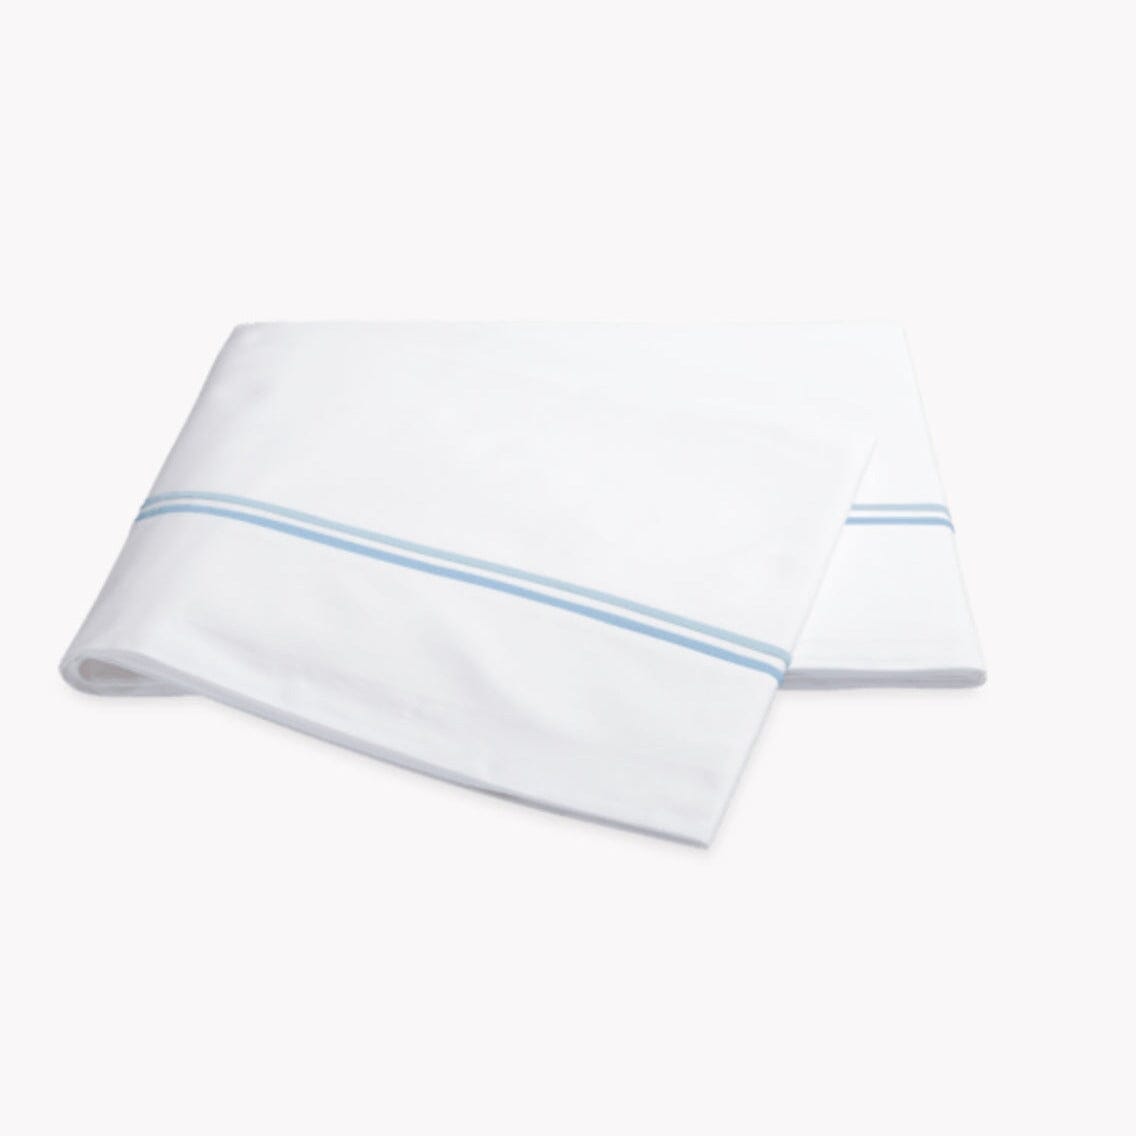 Matouk Essex Light Blue Bedding | Cotton Bed Sheets & Duvet Covers at Fig Linens and Home